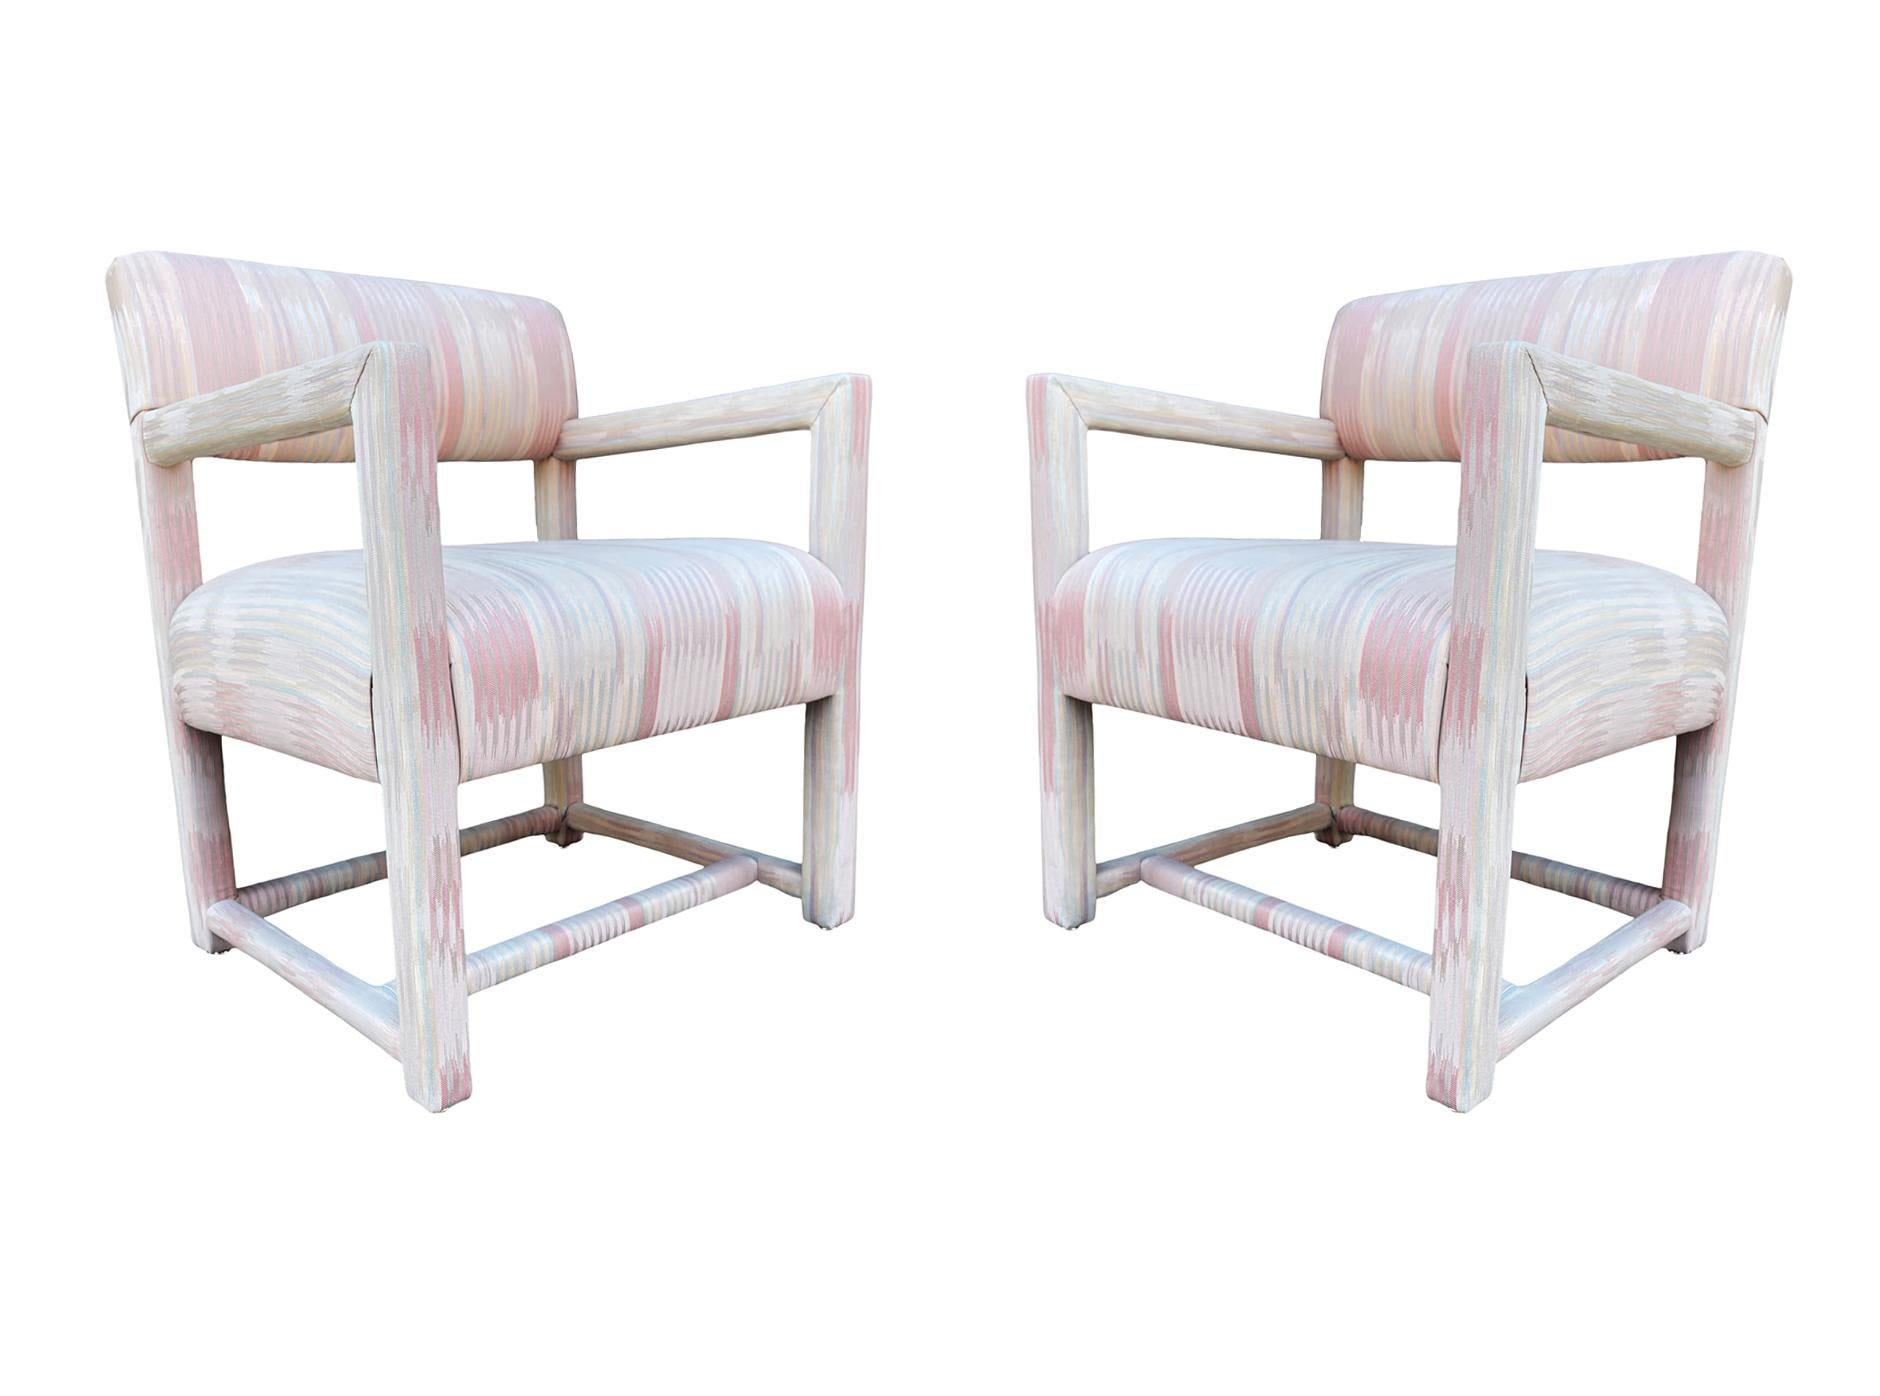 Pair of Mid-Century Modern Parsons Armchair Lounge Chairs after Milo Baughman For Sale 2